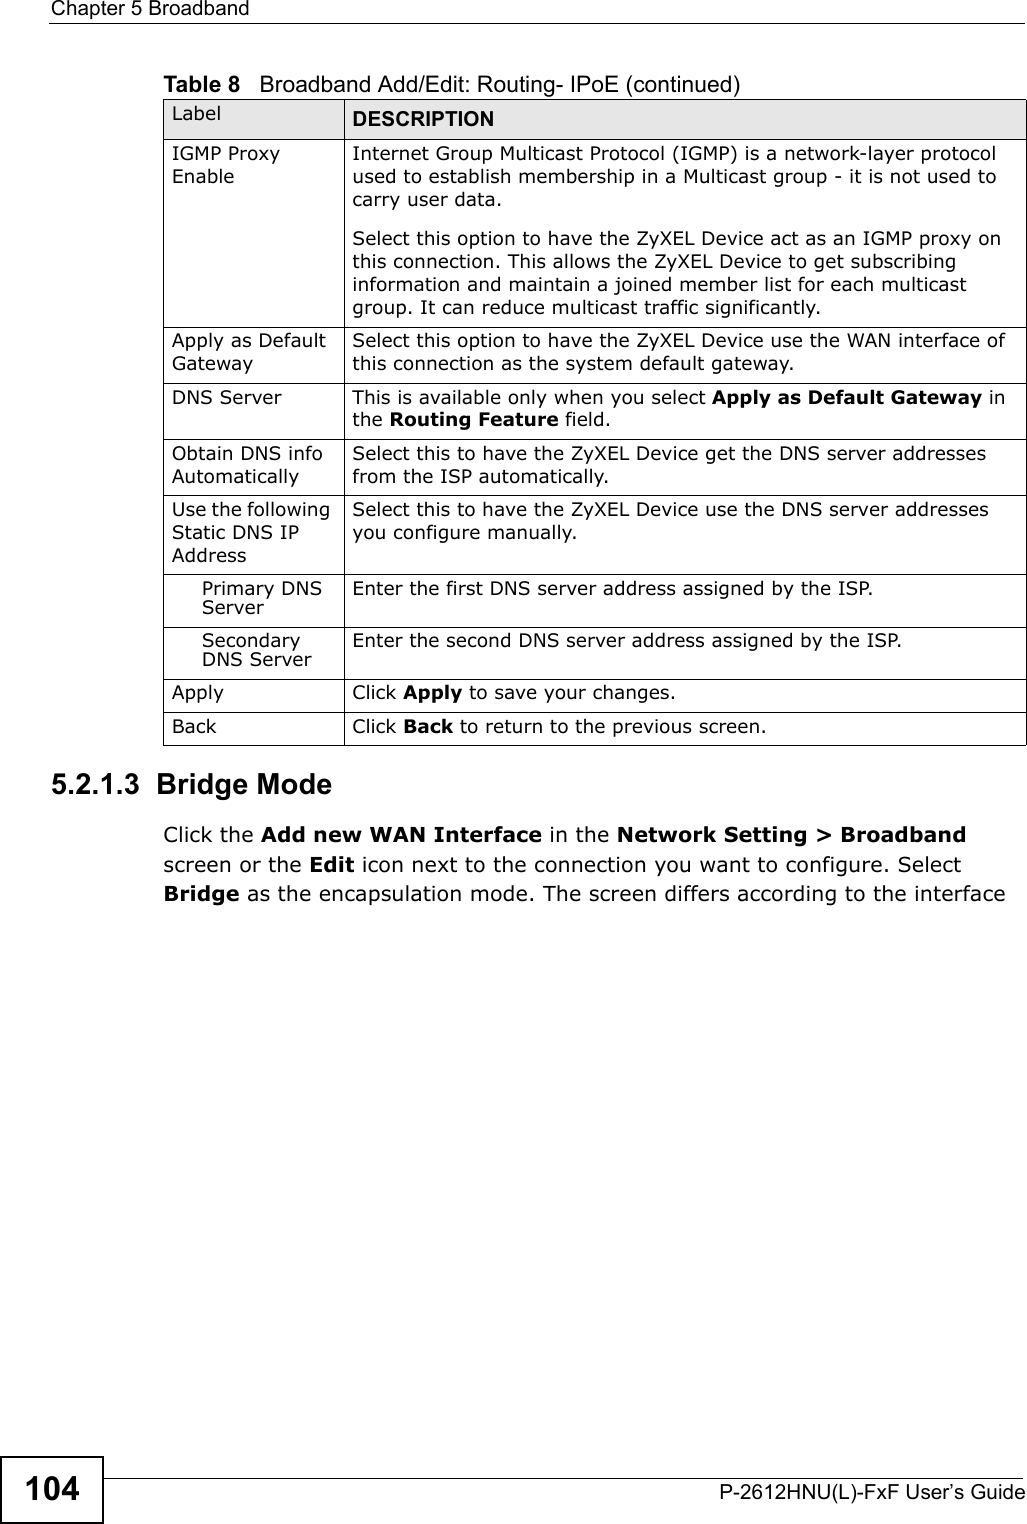 Chapter 5 BroadbandP-2612HNU(L)-FxF User’s Guide1045.2.1.3  Bridge ModeClick the Add new WAN Interface in the Network Setting &gt; Broadbandscreen or the Edit icon next to the connection you want to configure. SelectBridge as the encapsulation mode. The screen differs according to the interface IGMP Proxy EnableInternet Group Multicast Protocol (IGMP) is a network-layer protocol used to establish membership in a Multicast group - it is not used to carry user data.Select this option to have the ZyXEL Device act as an IGMP proxy on this connection. This allows the ZyXEL Device to get subscribing information and maintain a joined member list for each multicast group. It can reduce multicast traffic significantly.Apply as Default GatewaySelect this option to have the ZyXEL Device use the WAN interface of this connection as the system default gateway.DNS Server This is available only when you select Apply as Default Gateway in the Routing Feature field.Obtain DNS info AutomaticallySelect this to have the ZyXEL Device get the DNS server addresses from the ISP automatically.Use the following Static DNS IP AddressSelect this to have the ZyXEL Device use the DNS server addresses you configure manually.Primary DNS Server Enter the first DNS server address assigned by the ISP.SecondaryDNS Server Enter the second DNS server address assigned by the ISP.Apply Click Apply to save your changes.Back Click Back to return to the previous screen.Table 8   Broadband Add/Edit: Routing- IPoE (continued)Label DESCRIPTION